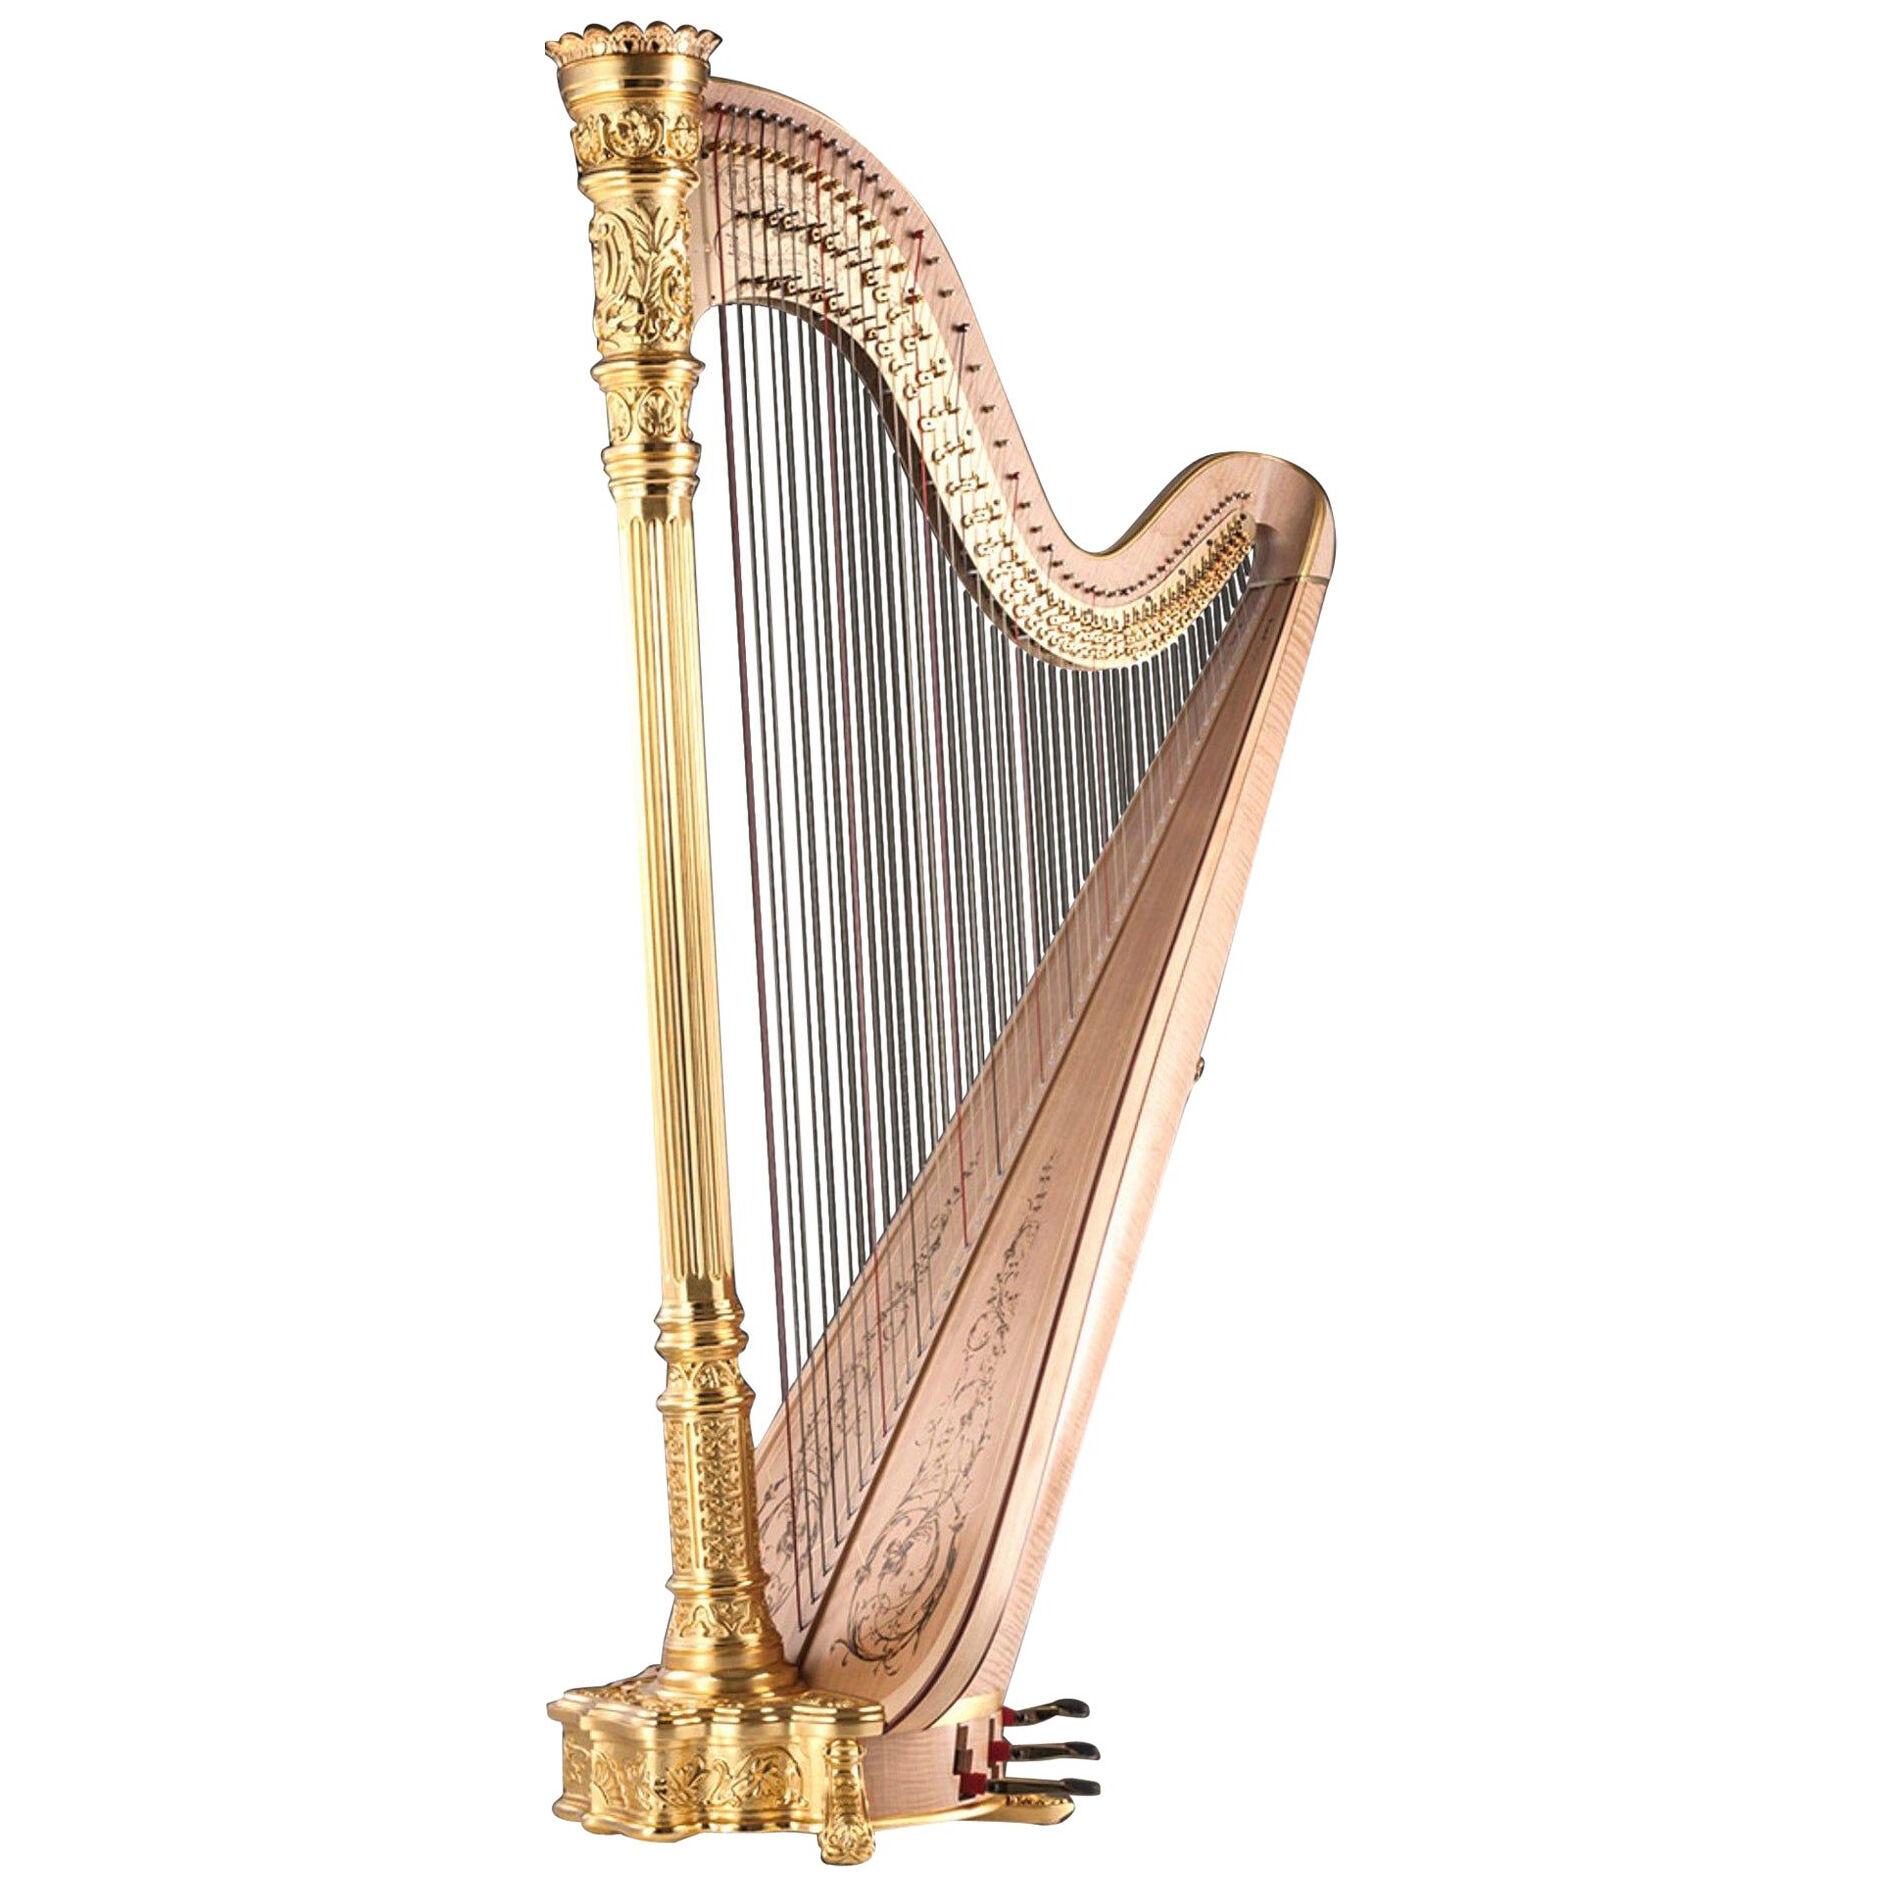 1915 Premium Style 23 Gold Lyon and Healy Concert Grand Harp